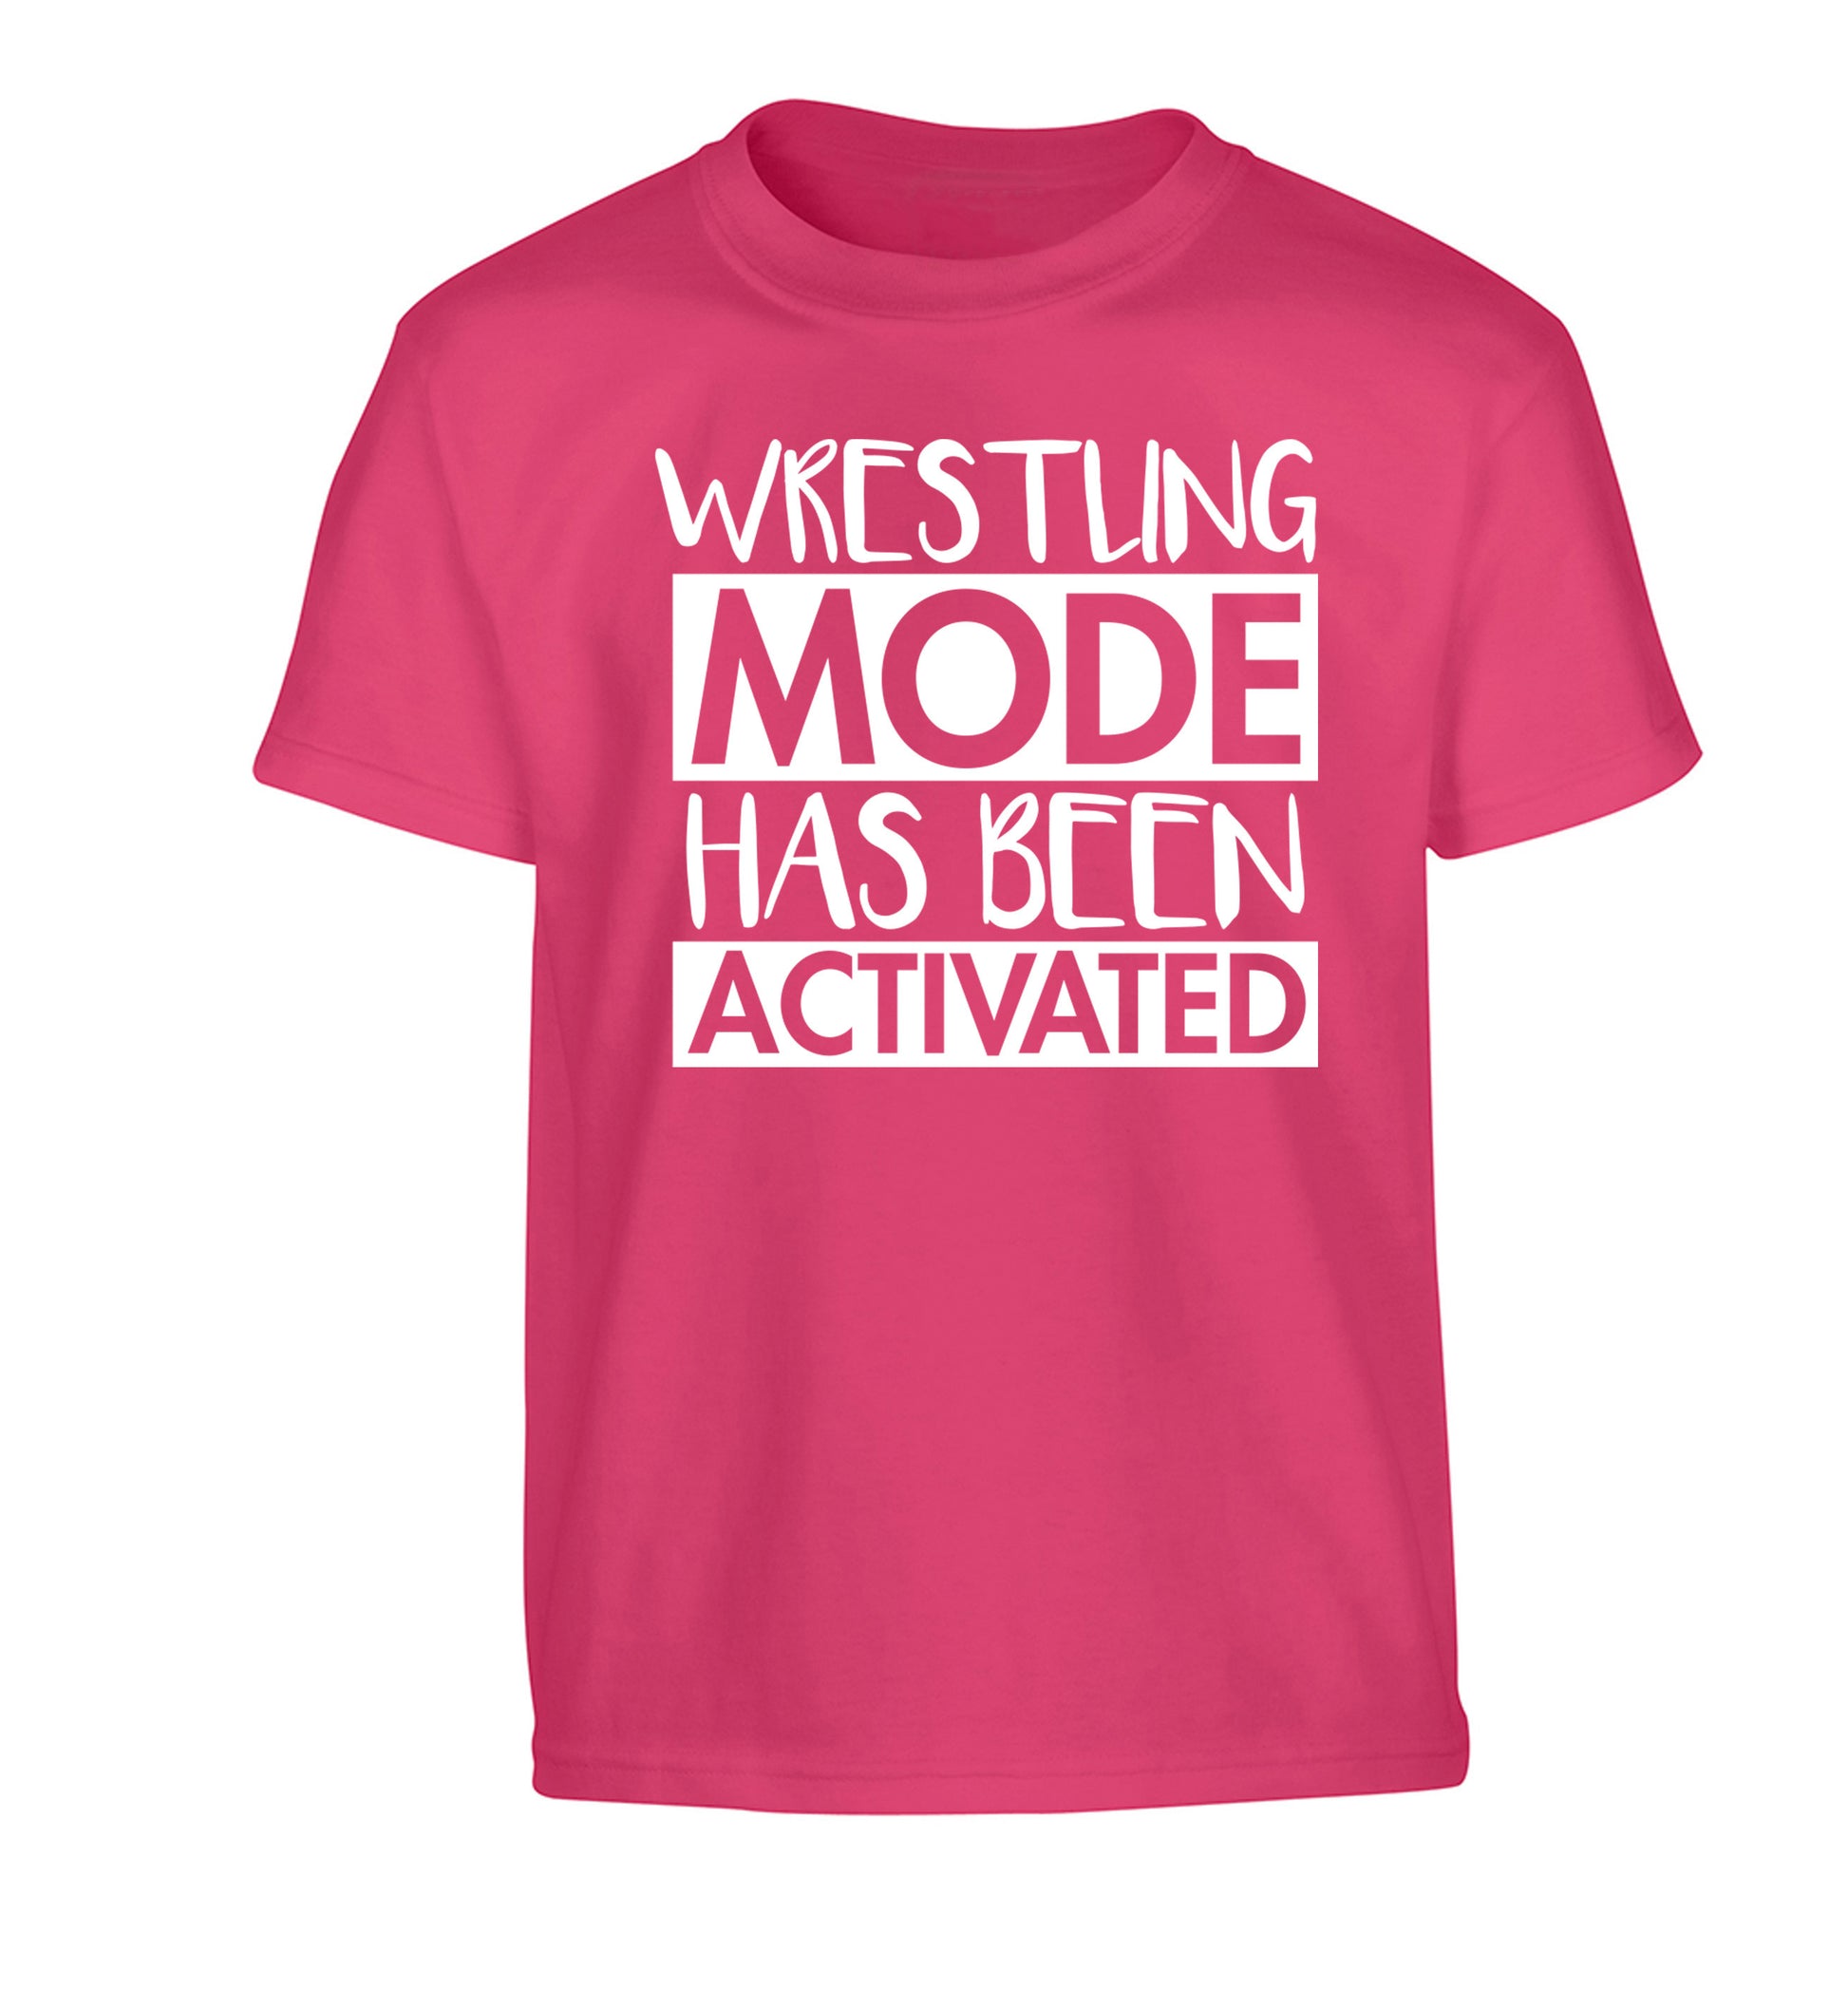 Wresting mode activated Children's pink Tshirt 12-14 Years